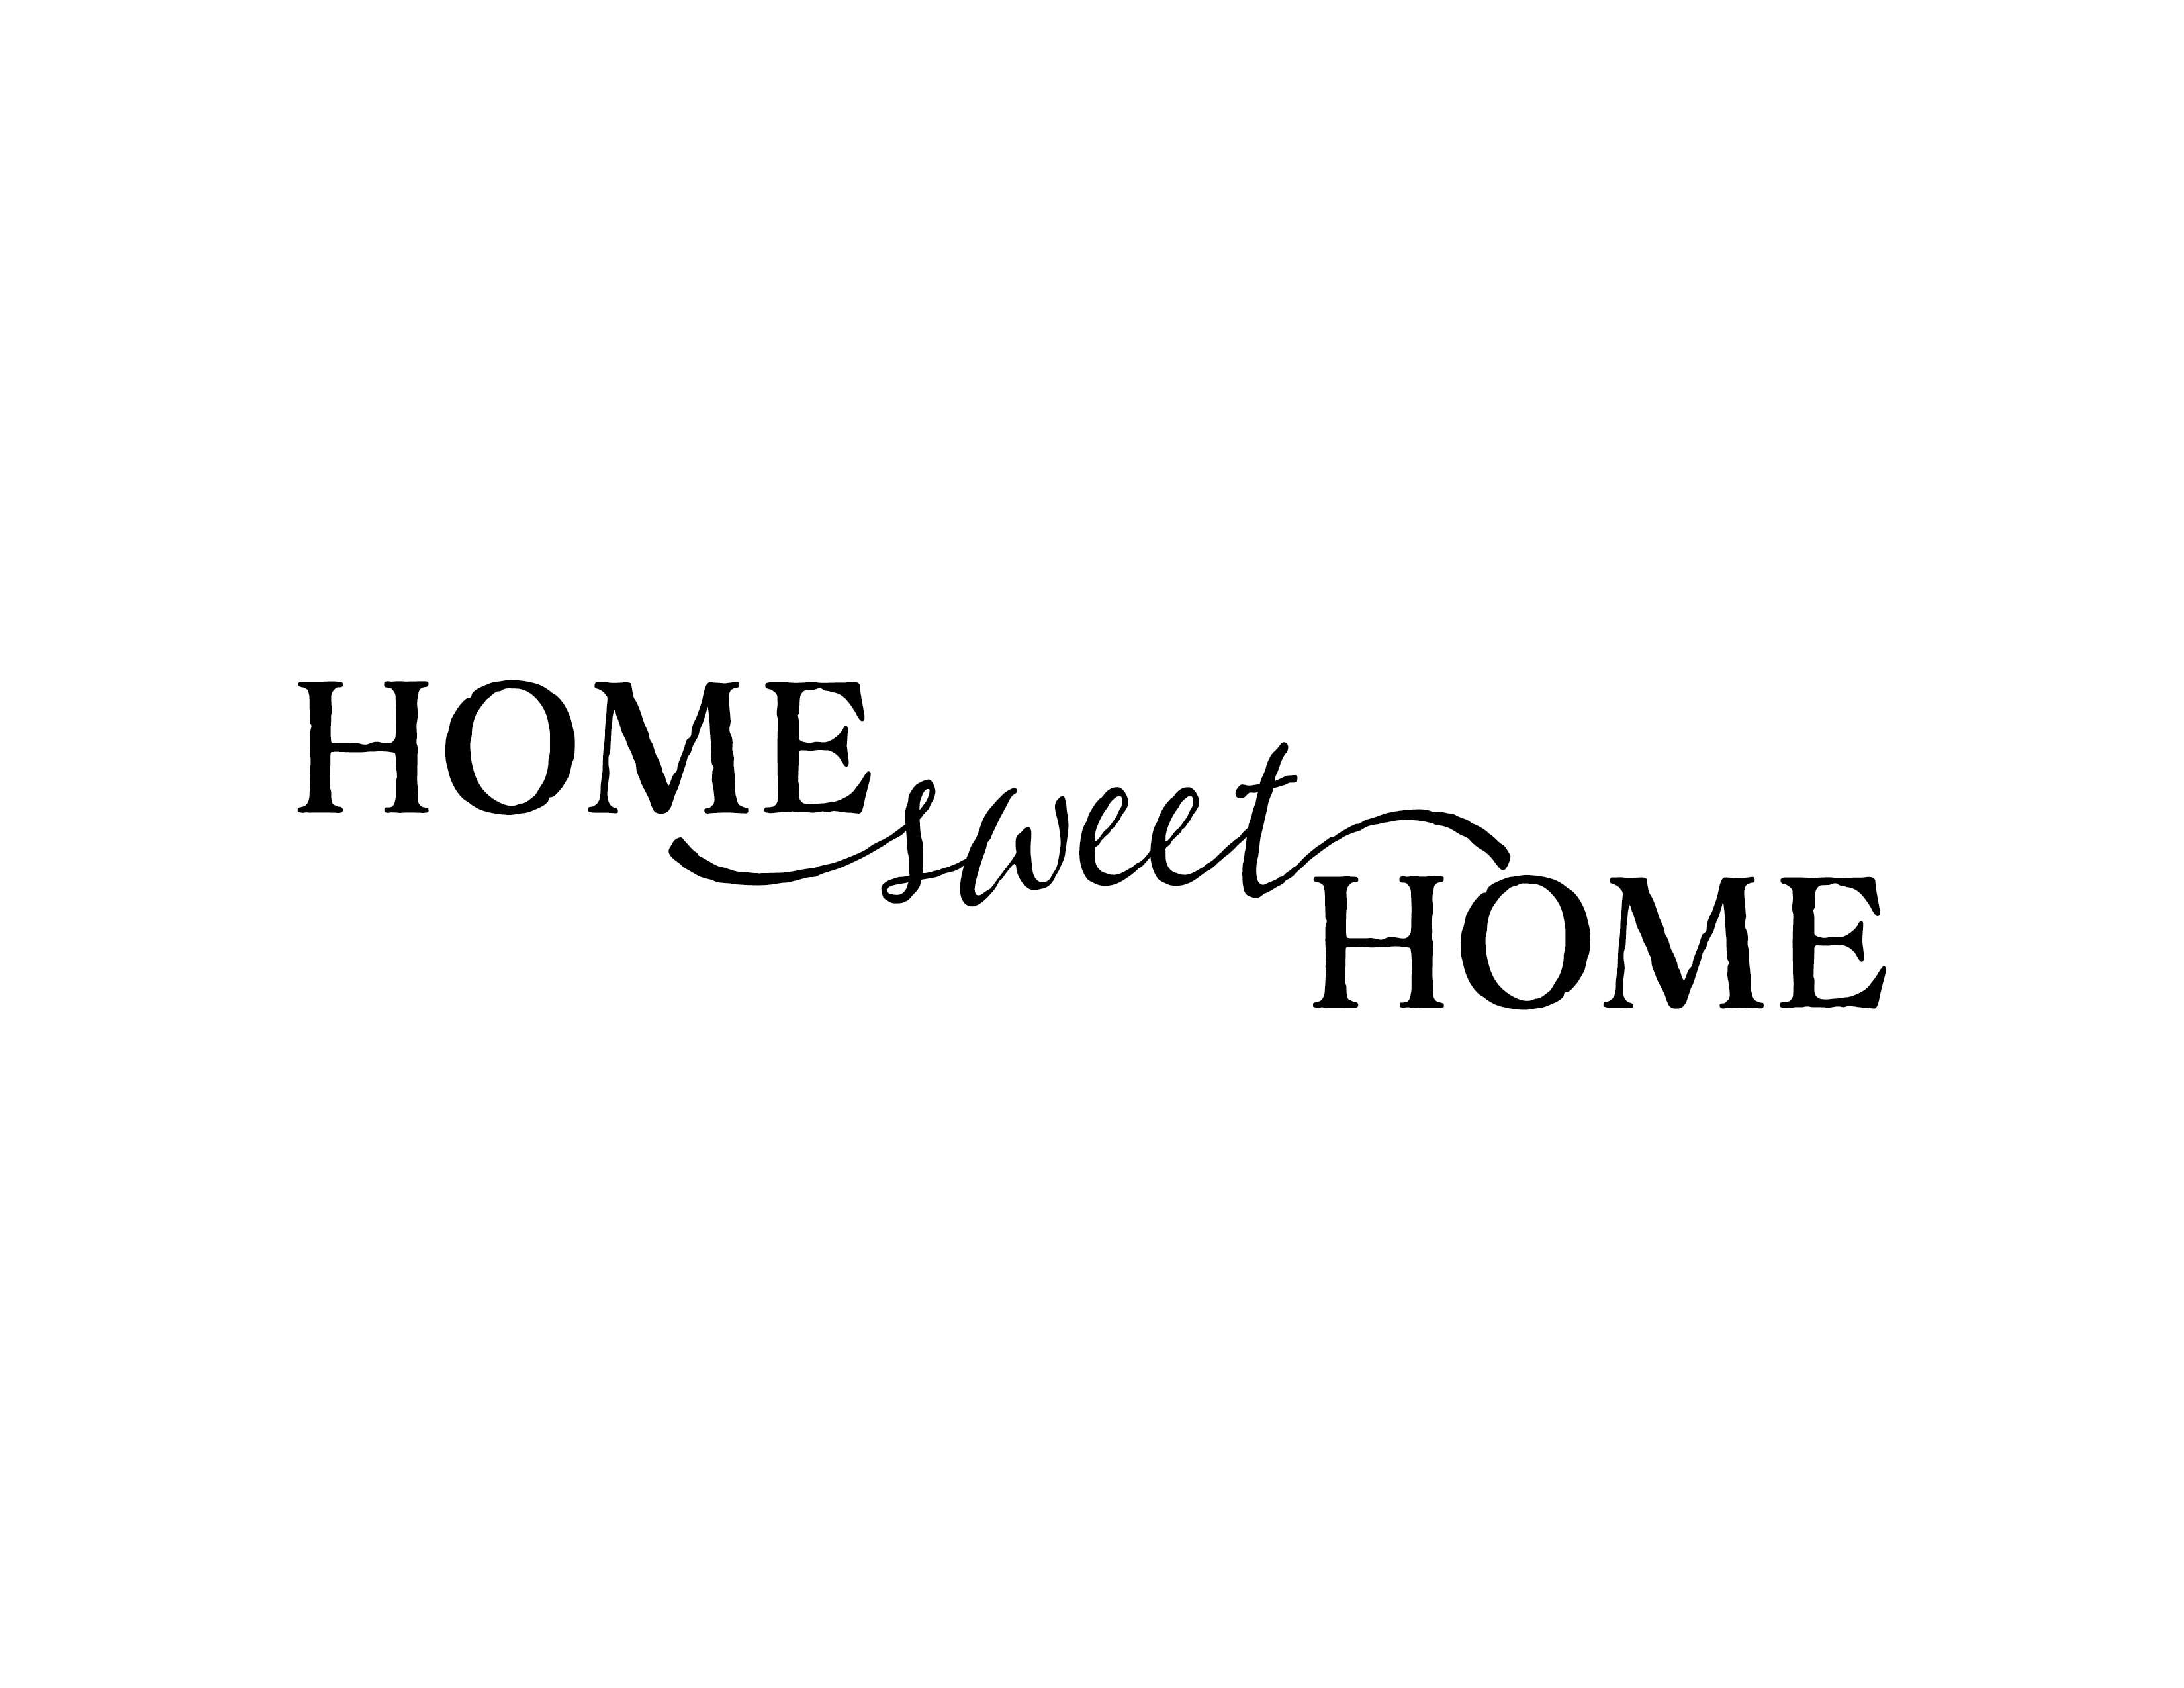 HH2084 Home sweet home V3 proof